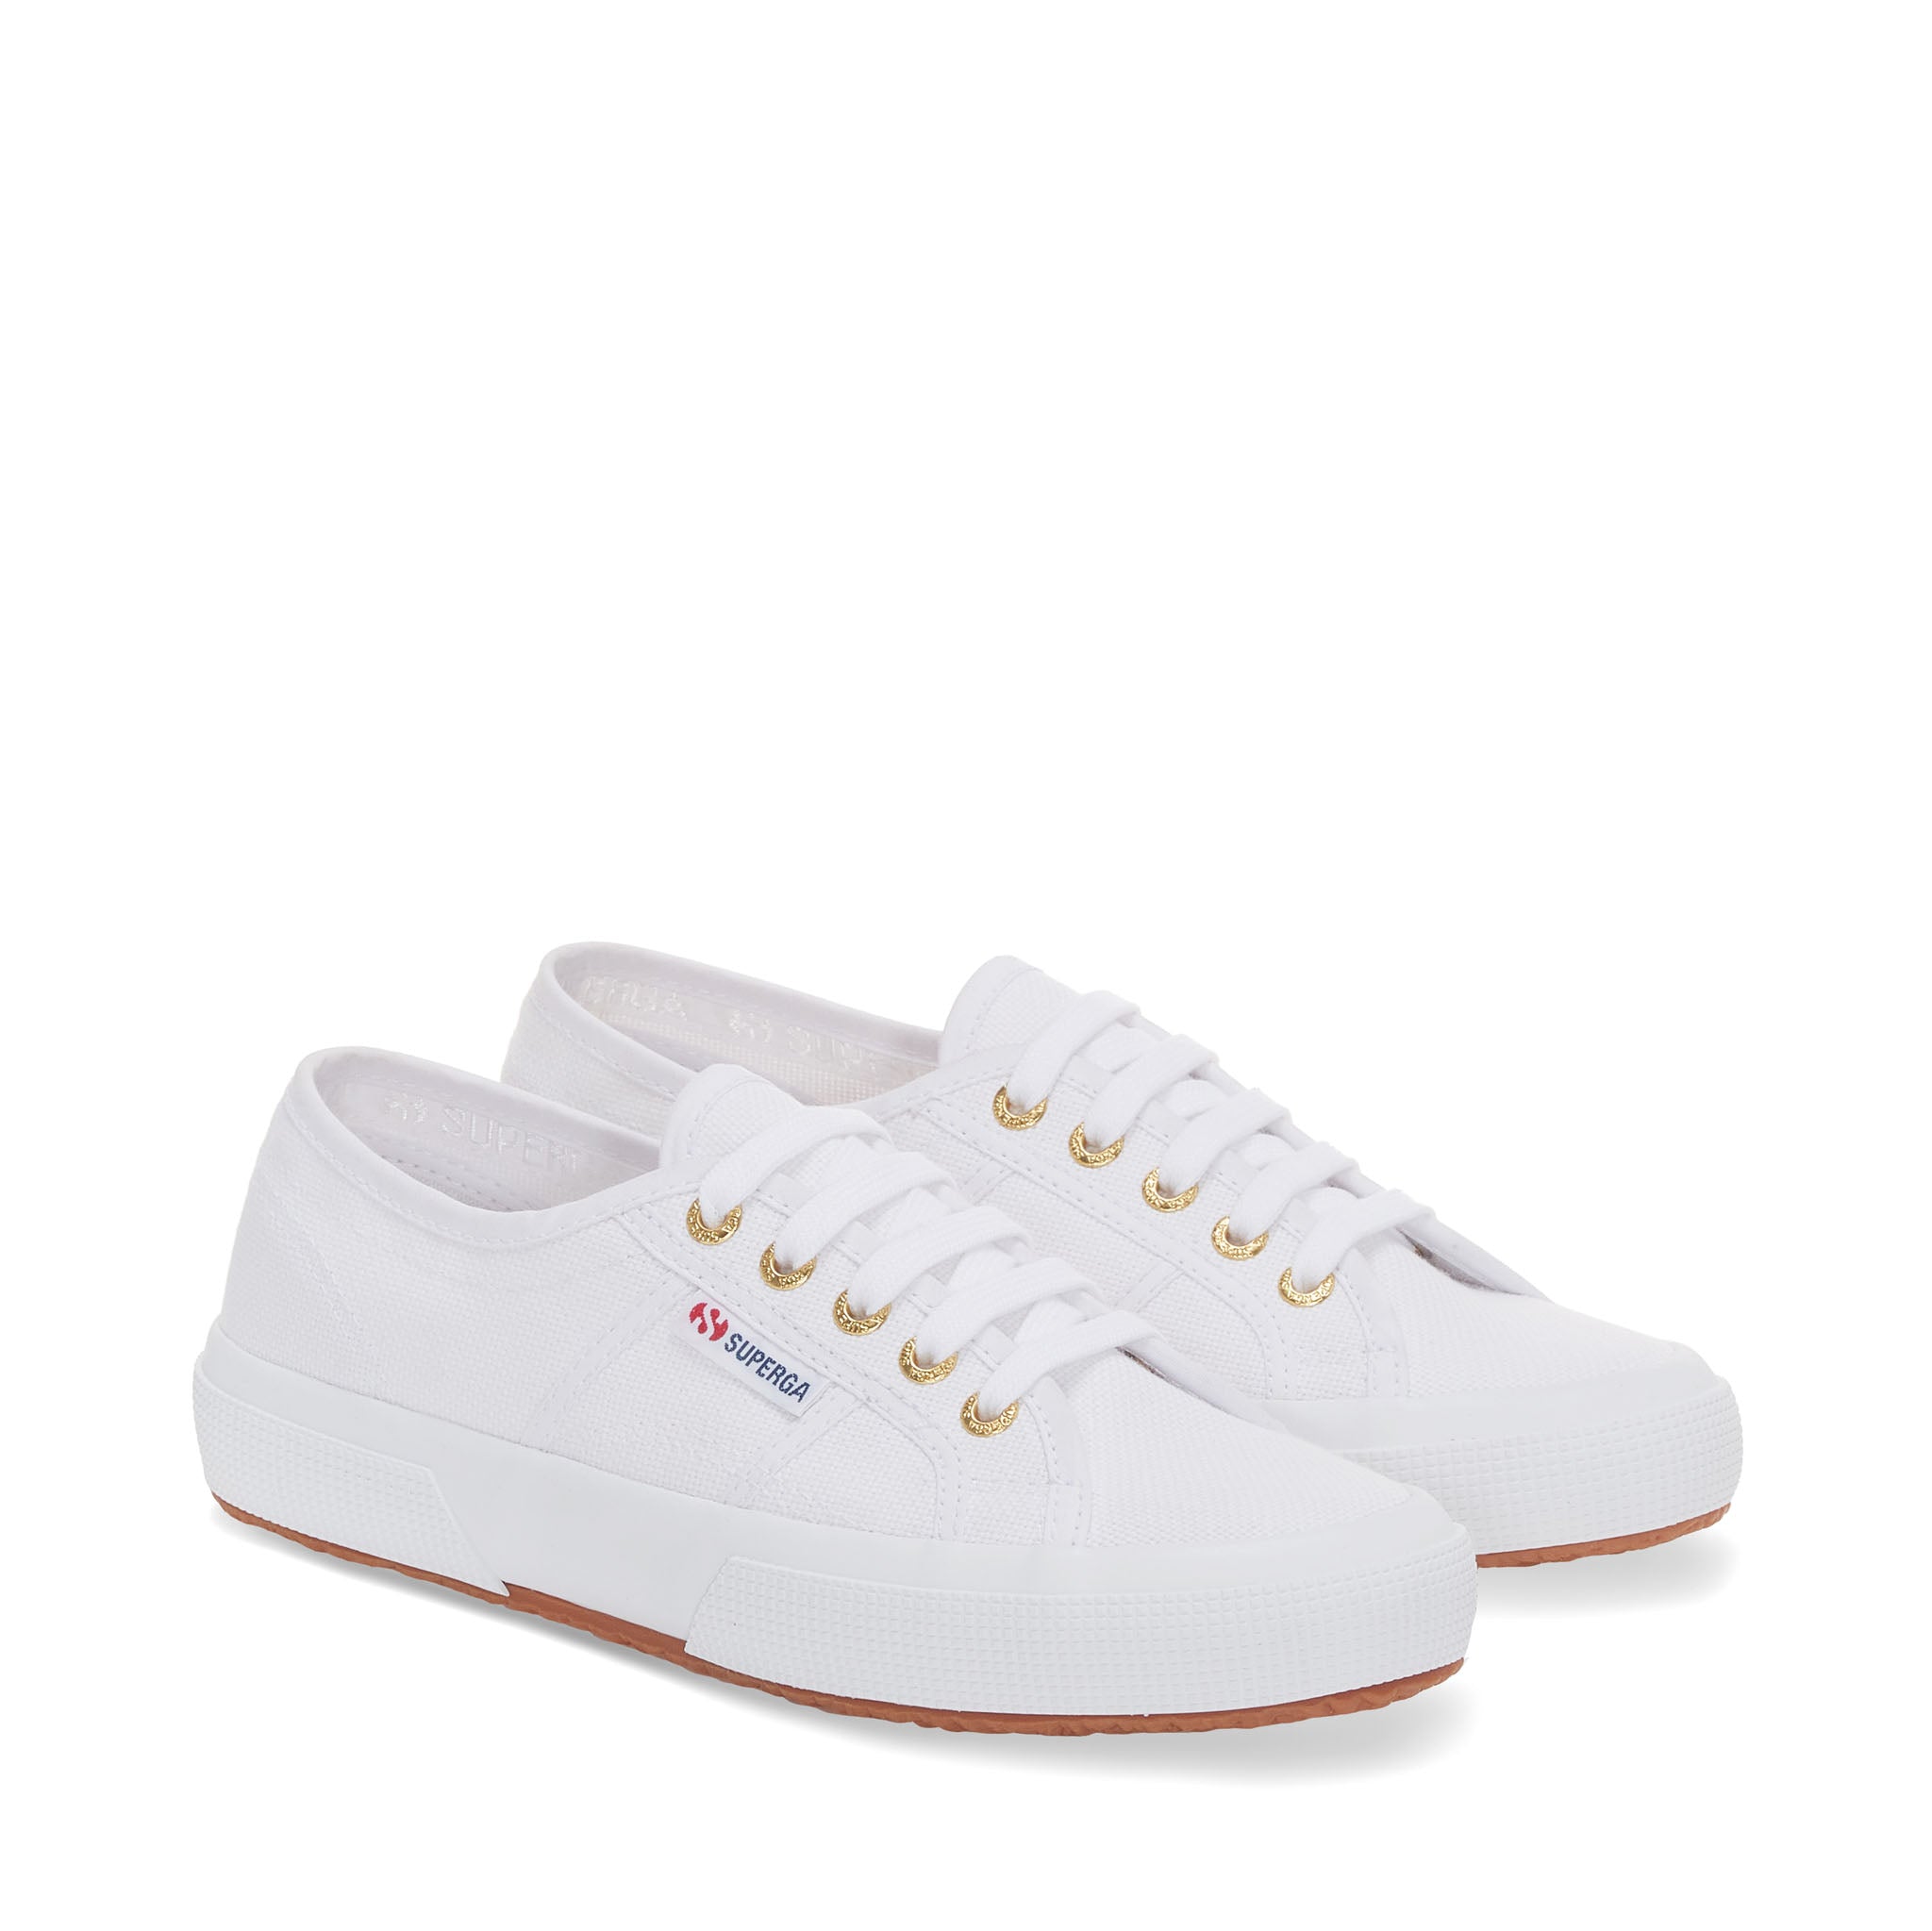 2750 Cotu Classic Sneakers - White Gold